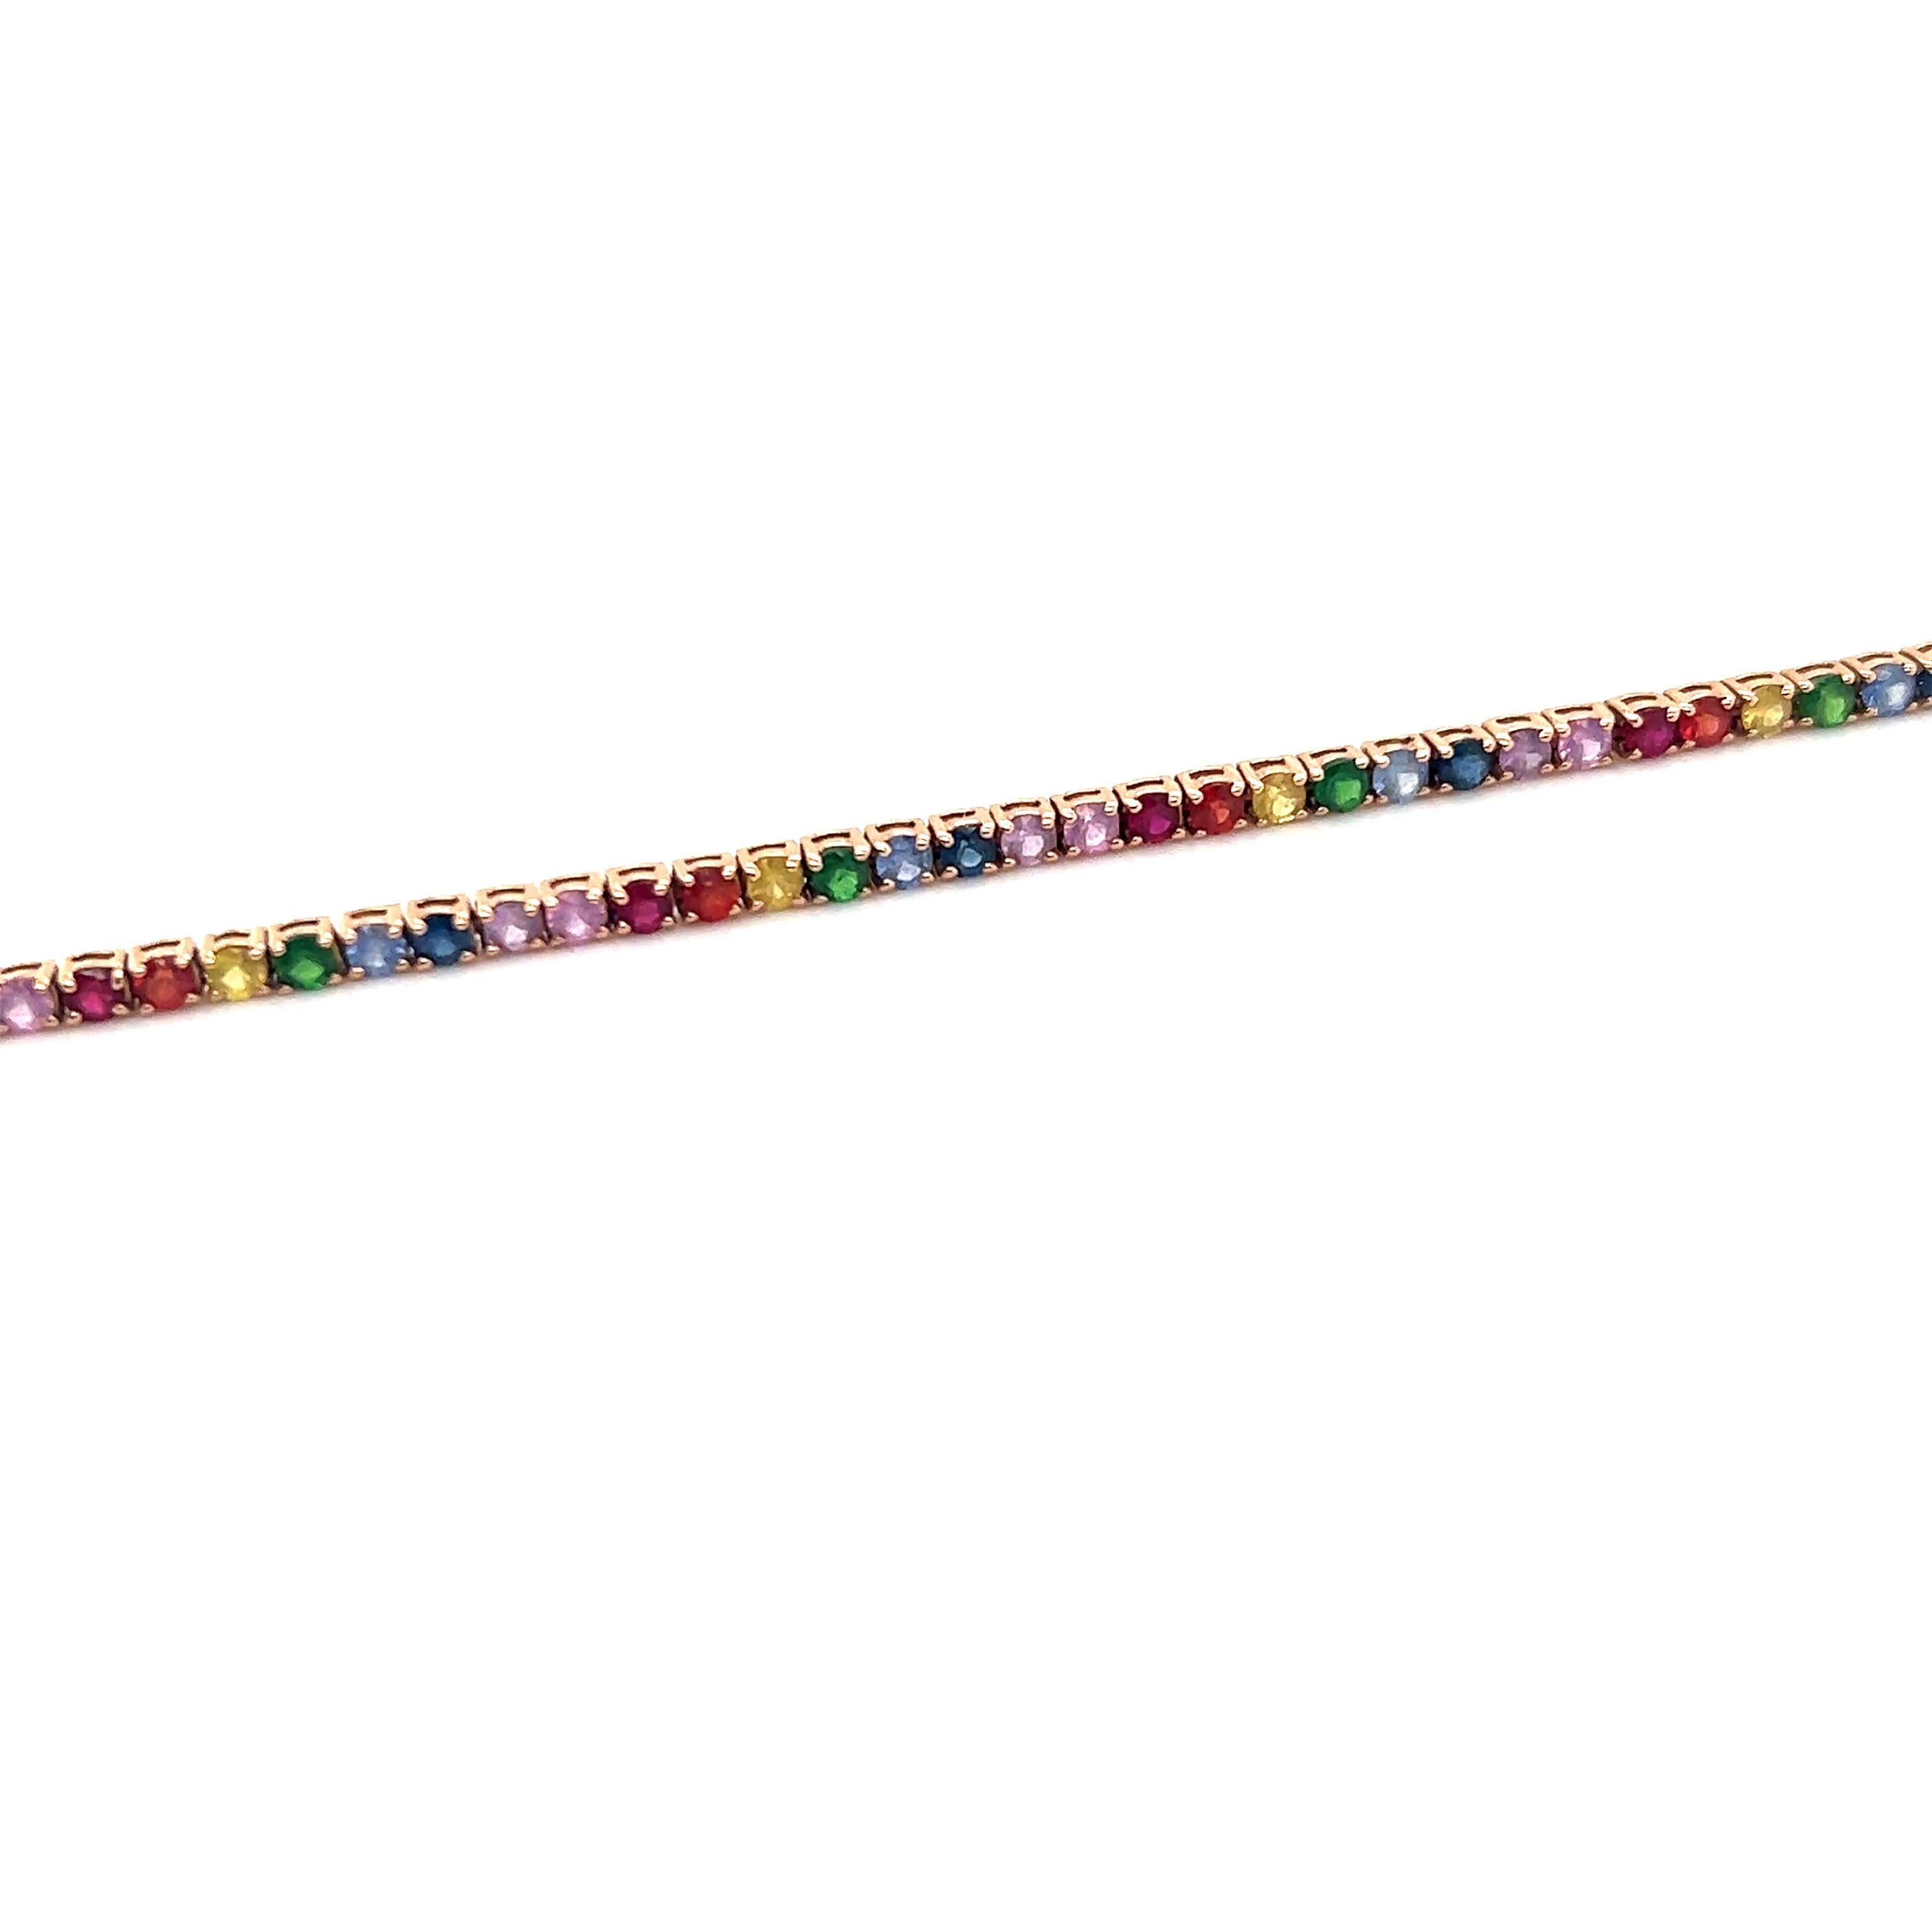 Trendy design seen on this modern bracelet crafted in 14k rose gold.  Sapphires come in a variety of different colors and this bracelet is a true showcase of mother natures beauty. The bracelet displays shades of blue, green, red and purple in a